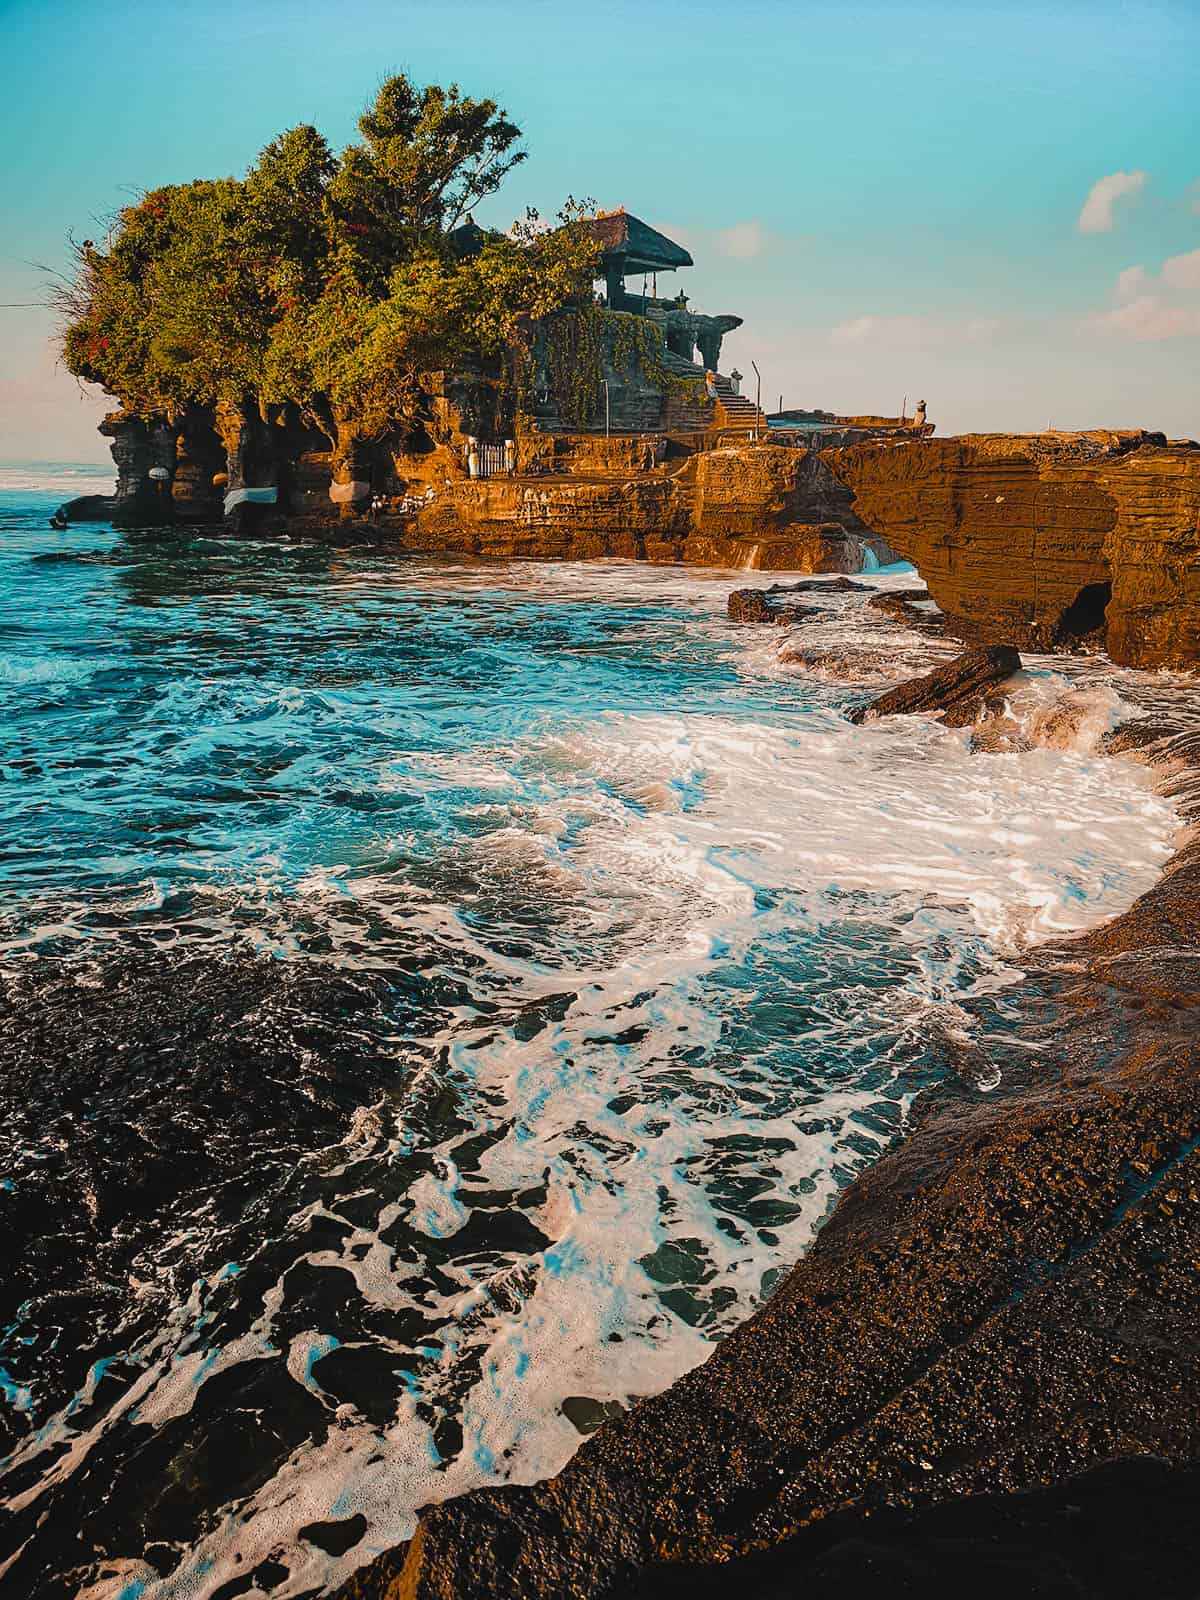 Travel Guide to Bali: Tanah Lot Templea against clear blue skies